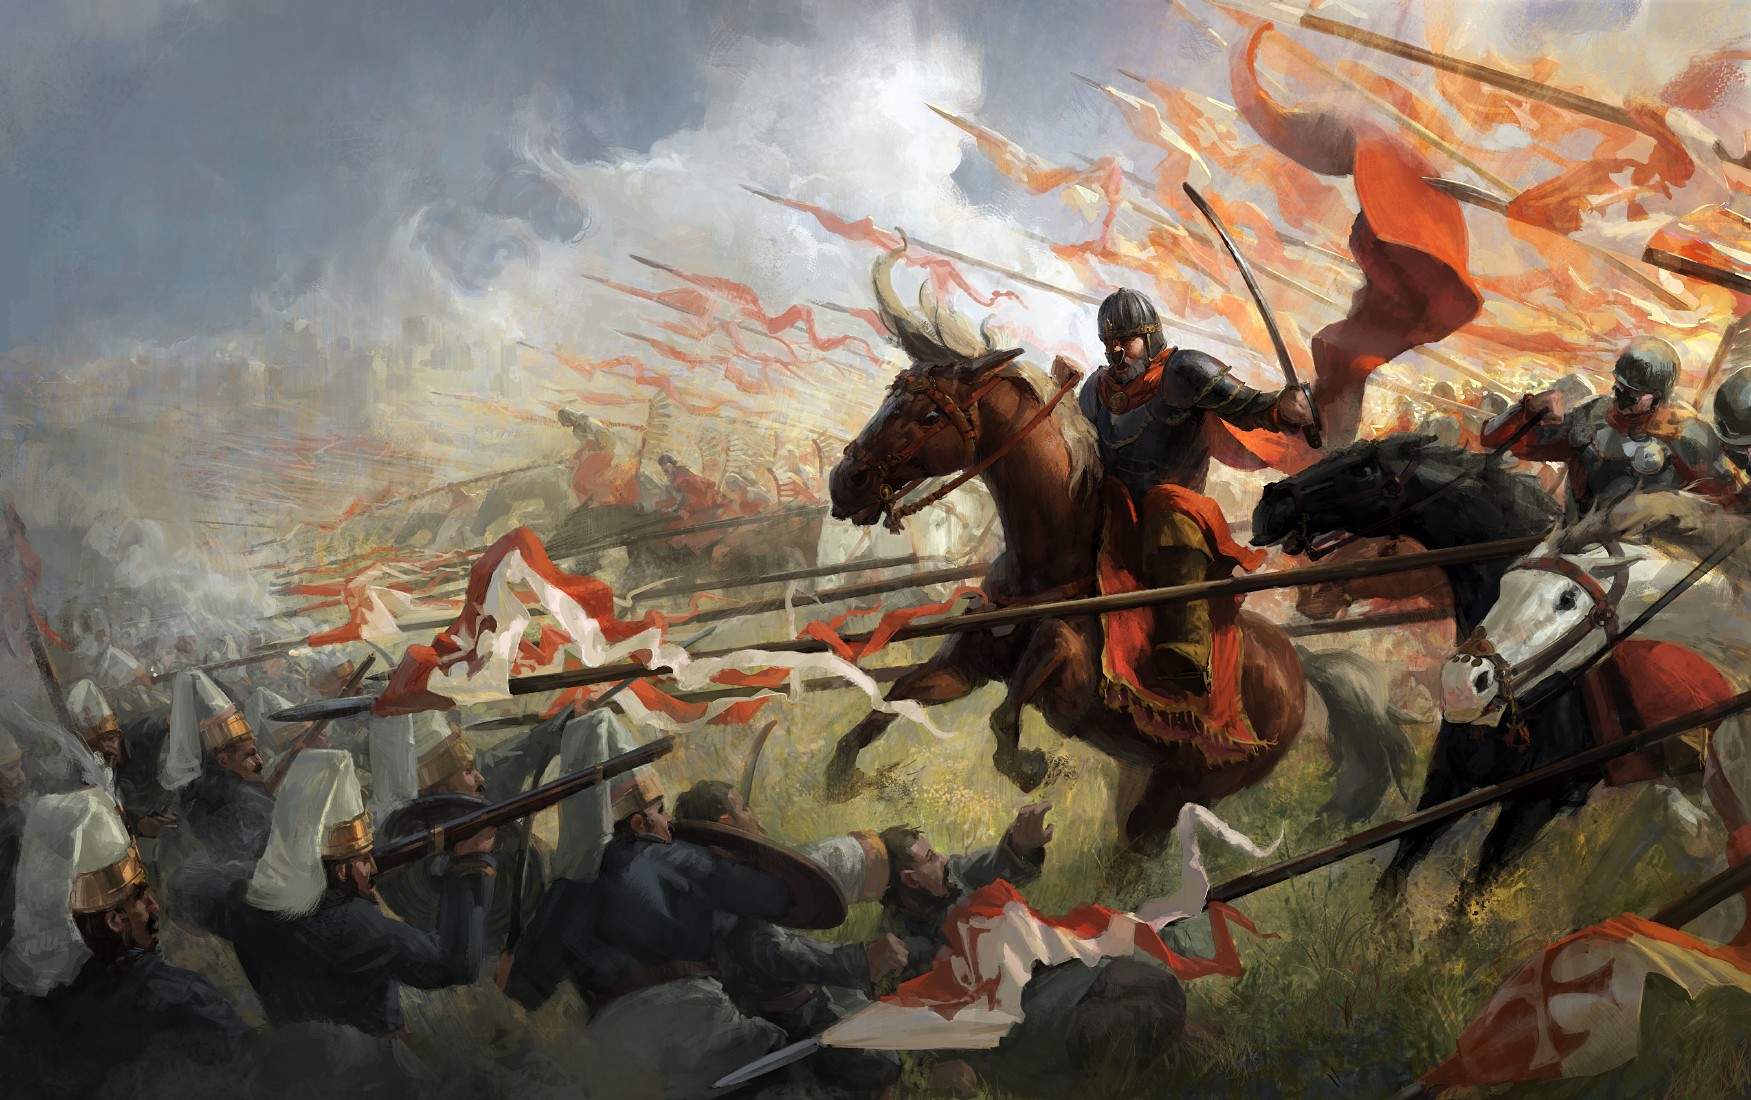 Winged Hussars, Lithuania, Poland, Horse, Janissaries, Crimean Khanate, Cavalry Wallpaper